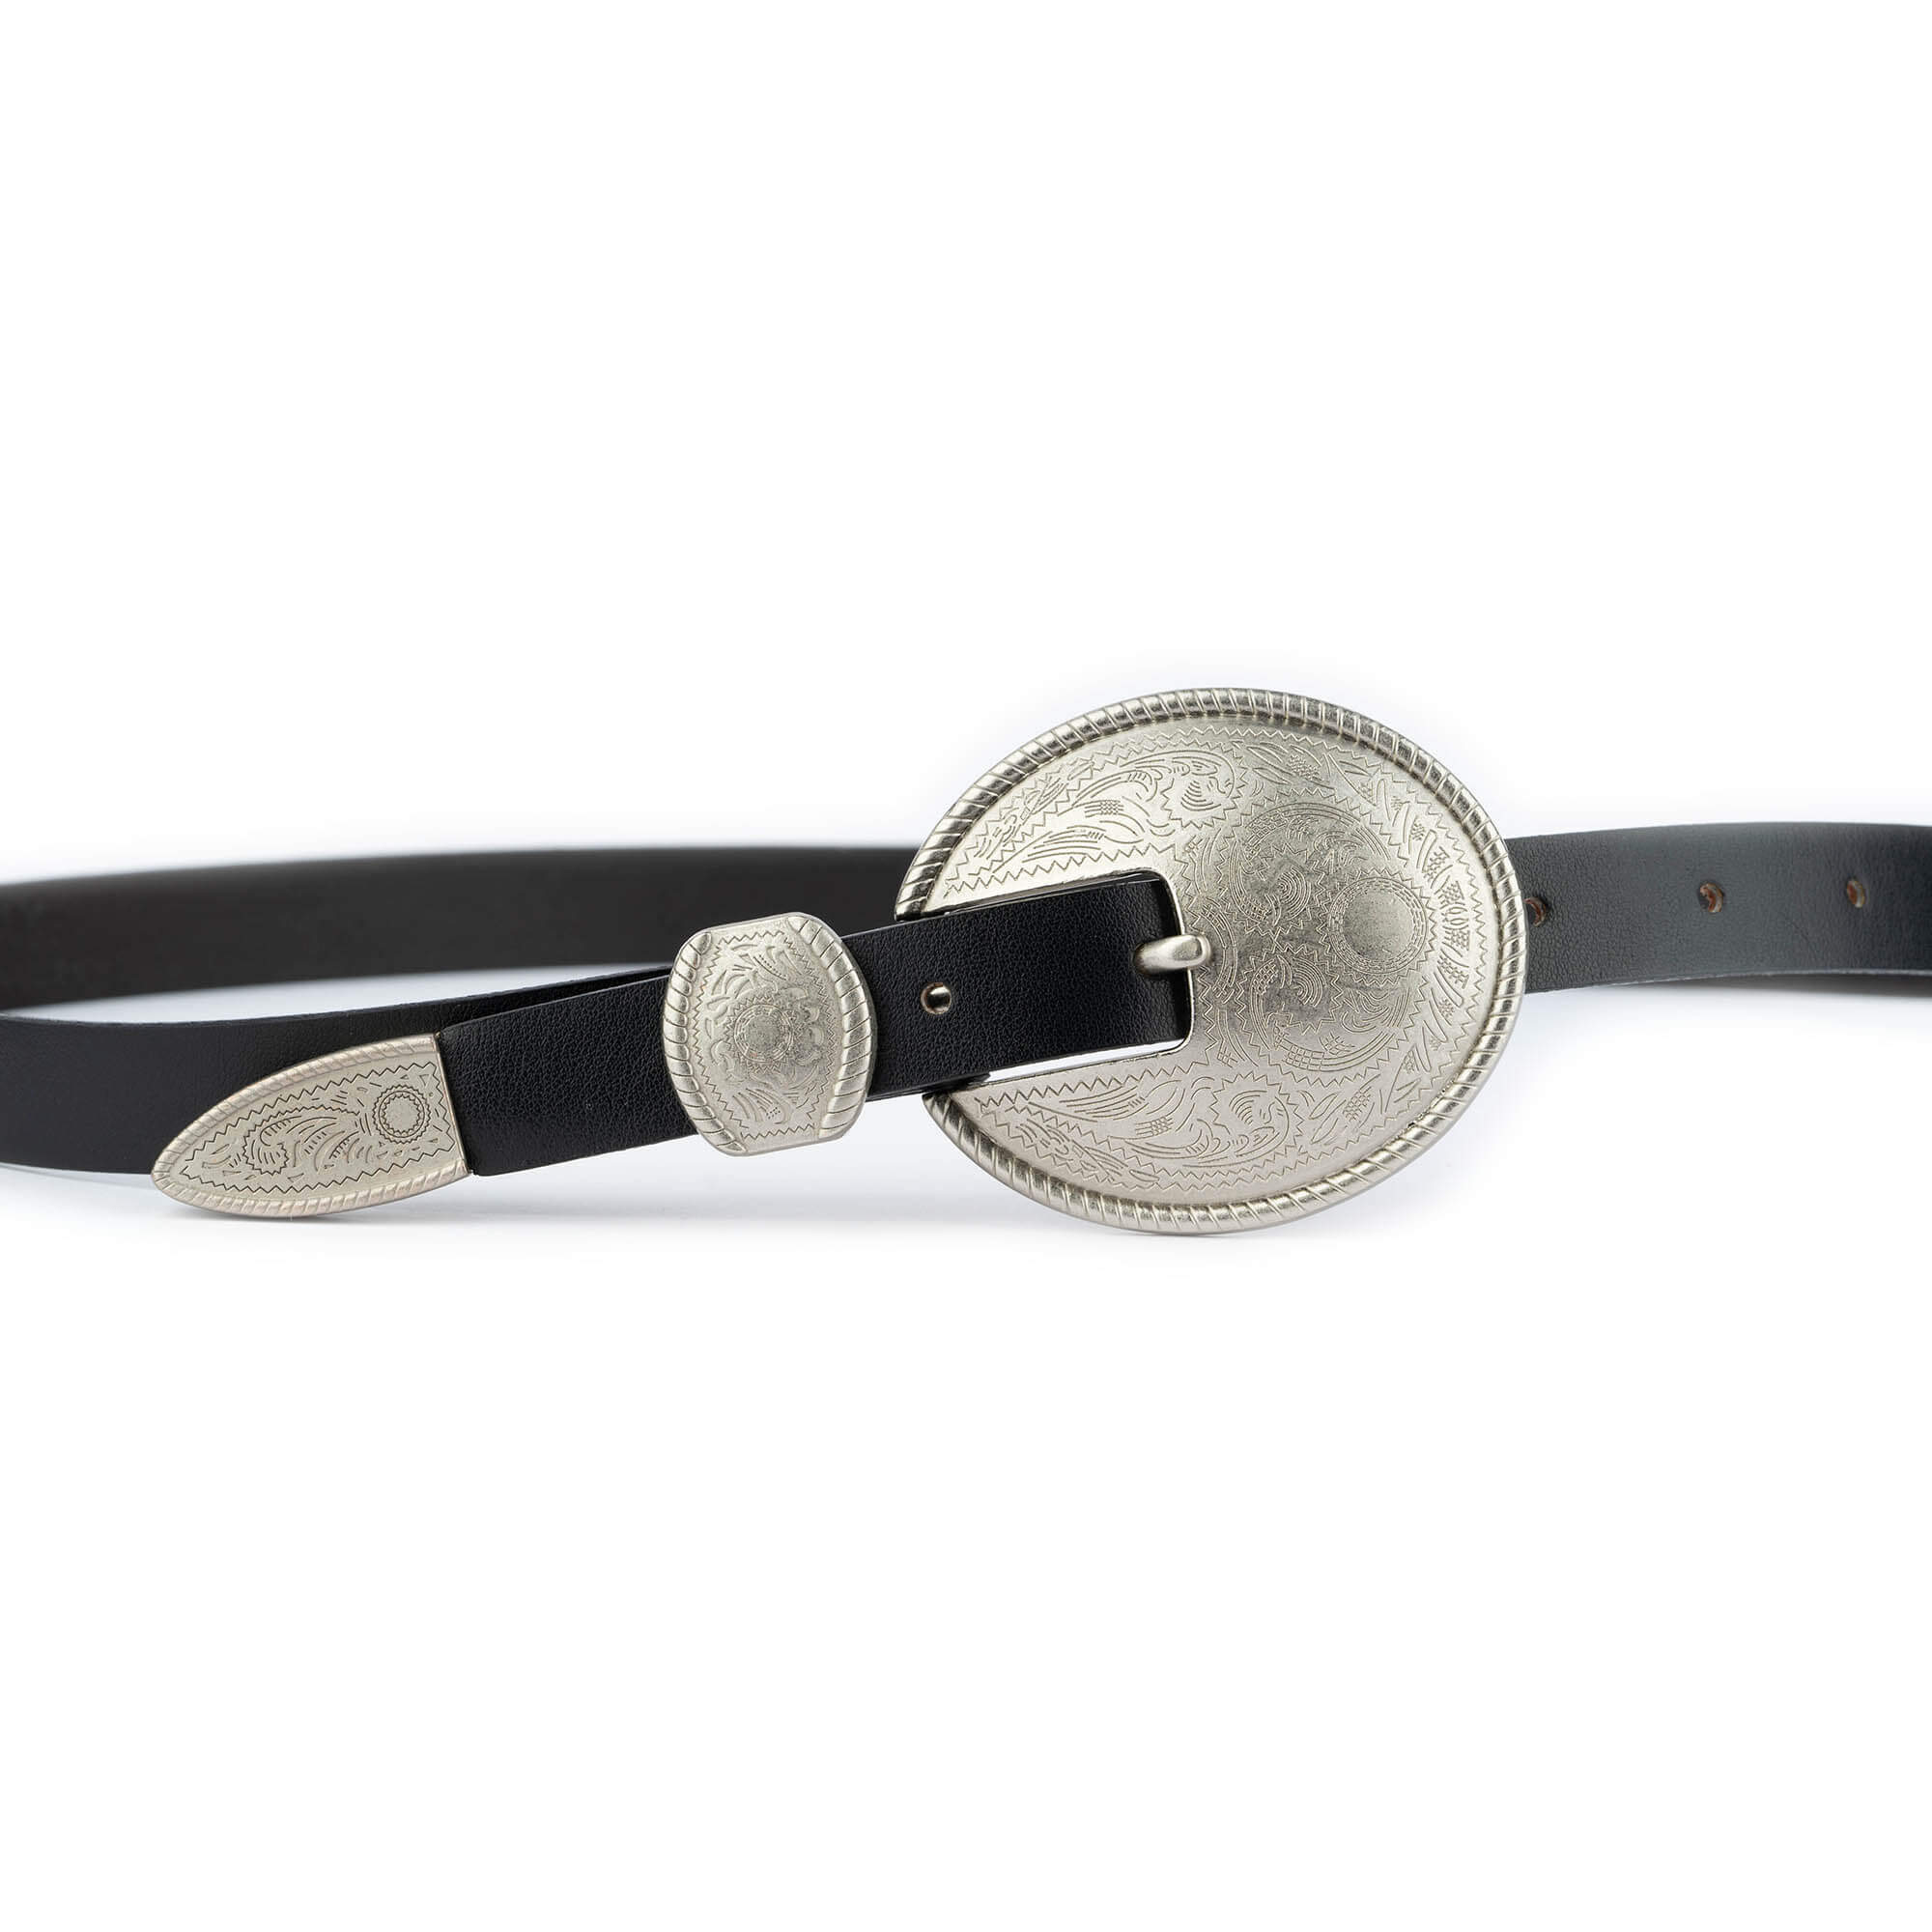 Western Belts for Women | Black Leather with Silver Buckle 42 / 105 cm - Black | Capo Pelle